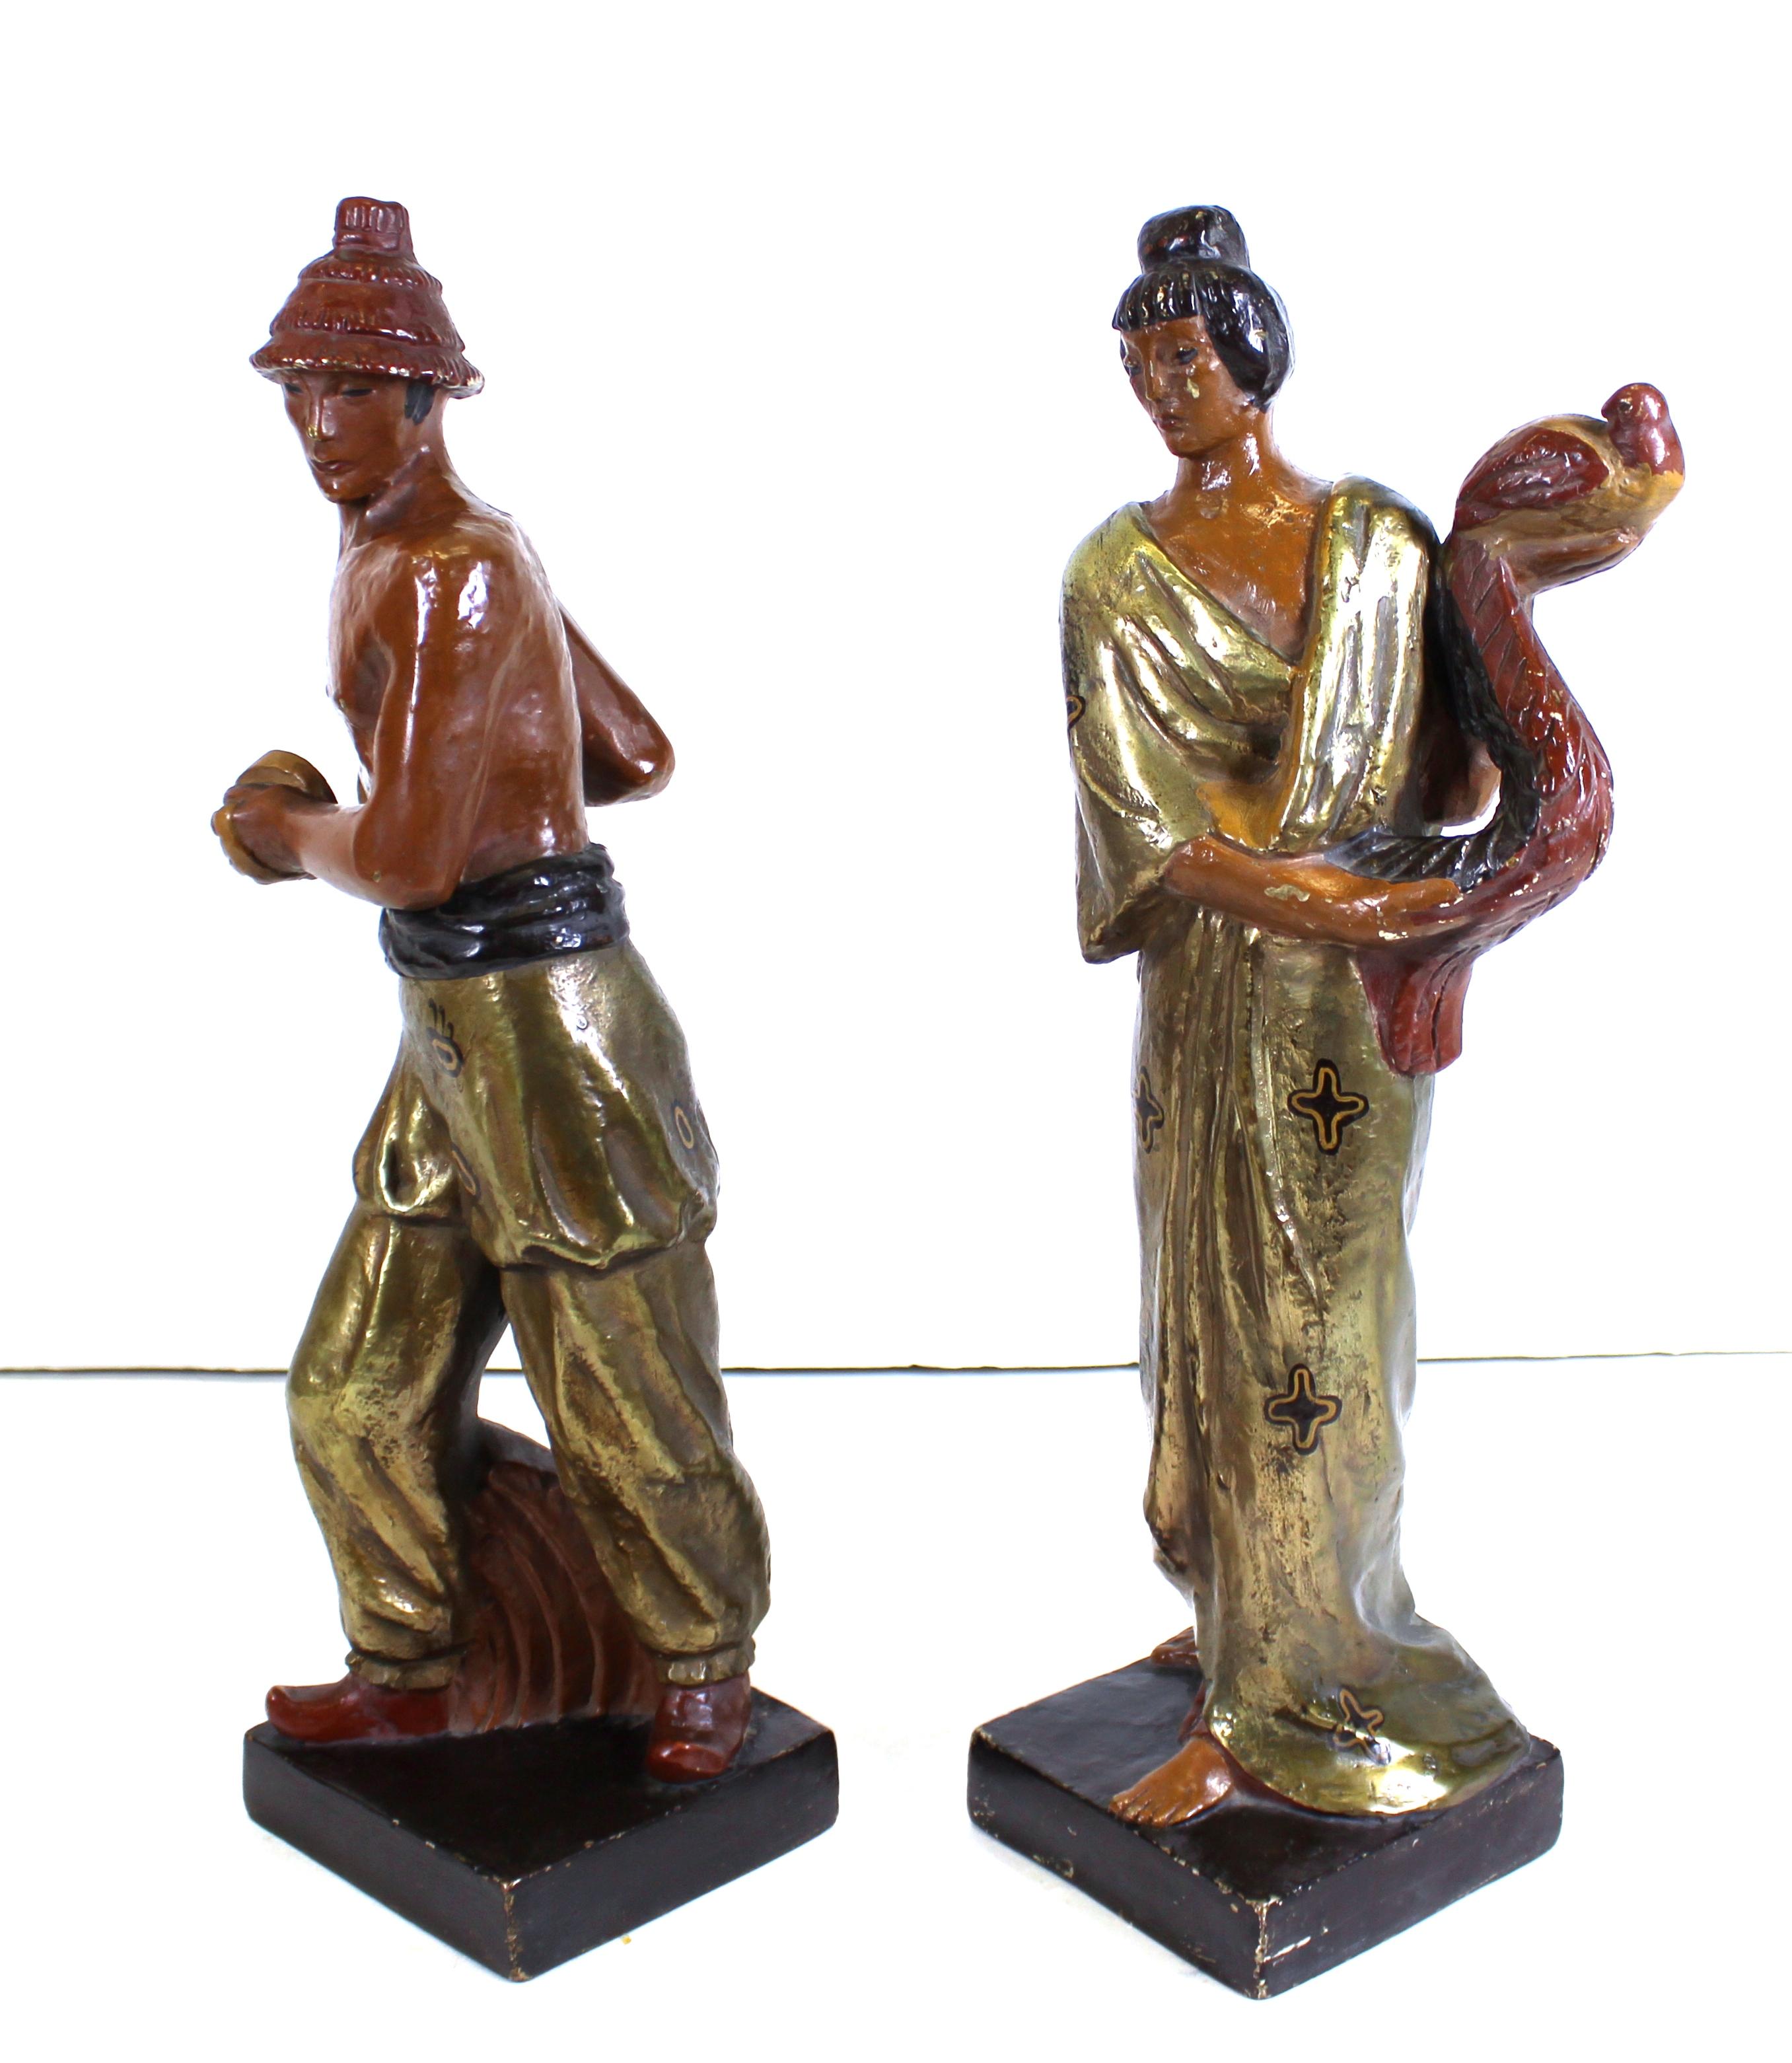 American Art Deco period pair of copper-clad terracotta sculptures of a couple in Japonesque style, a woman holding a peacock and a man with a hat holding musical instruments. The pair is silver and gold leafed and hand painted. Each piece is signed